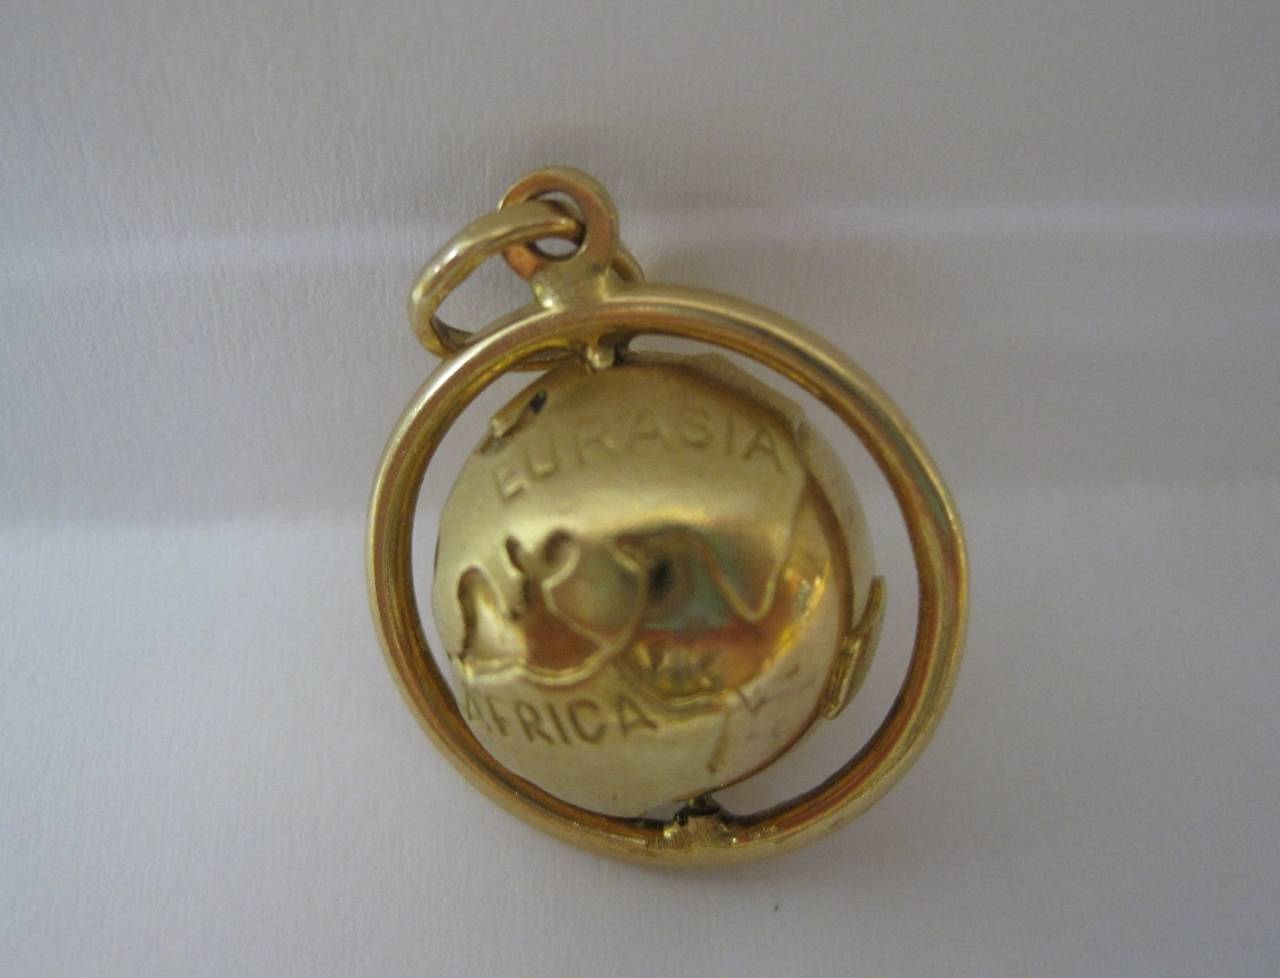 18-karat gold necklace globe pendant.

Free shipping within the United States and Canada.